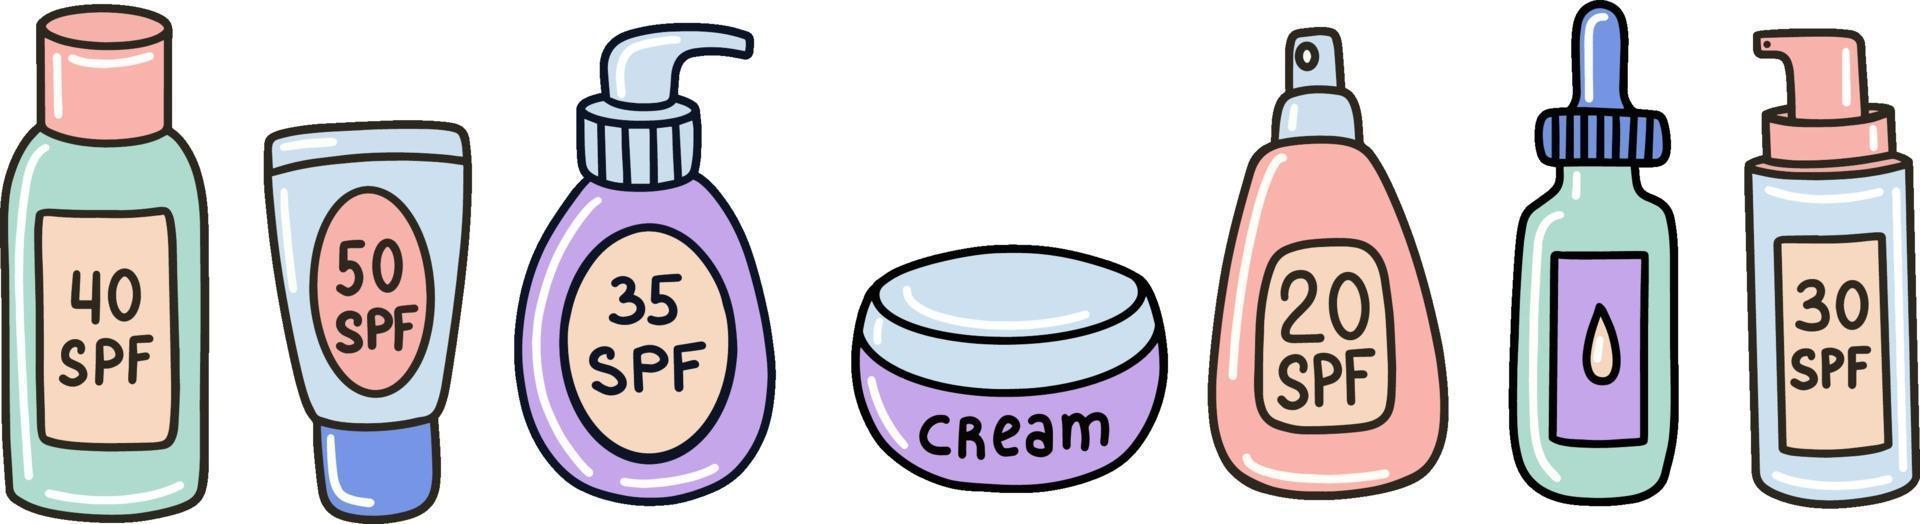 Vector illustration of bottles and jar of assorted sunblock products and cream for skin care procedure